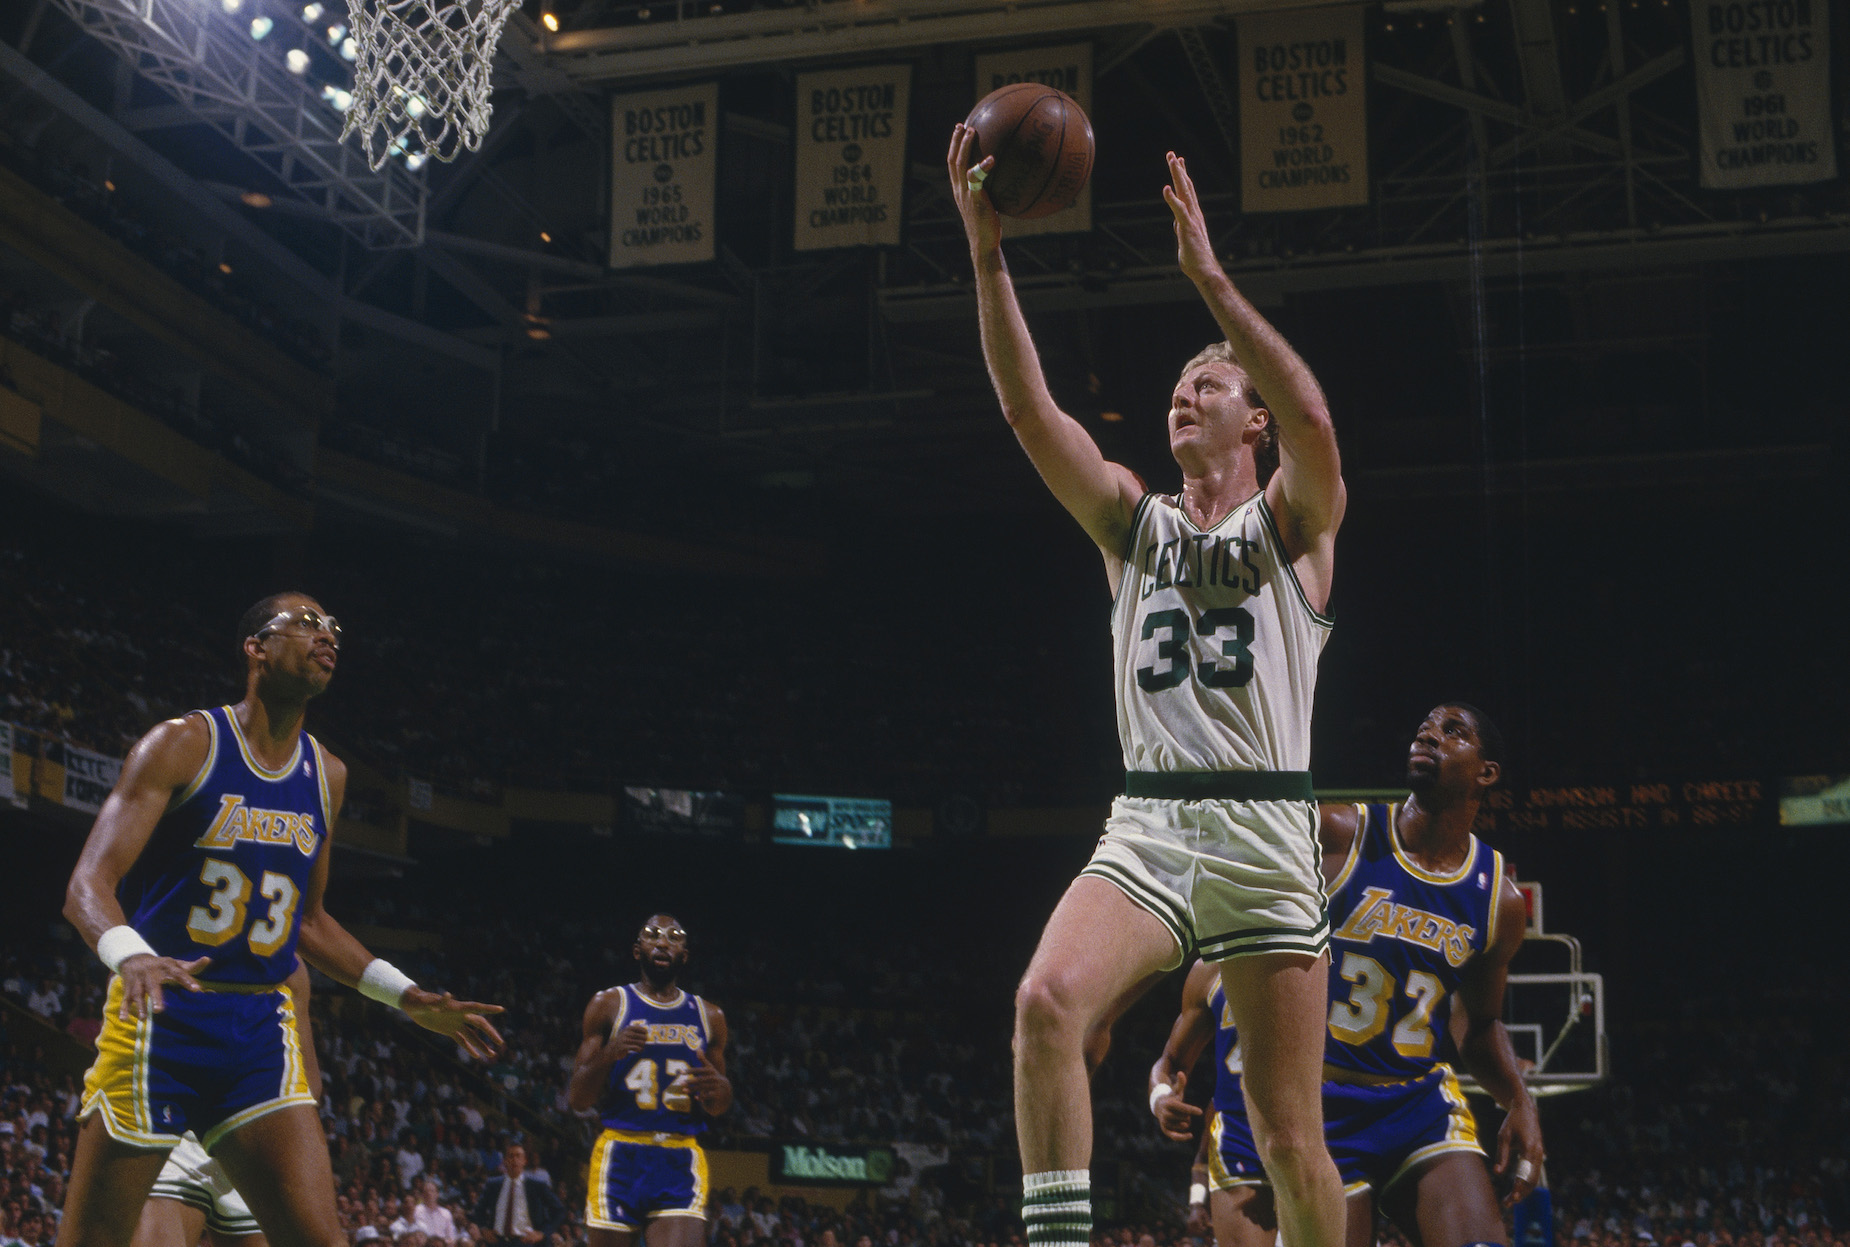 Larry Bird thought it was disrespectful when other teams would have white players defend against him.